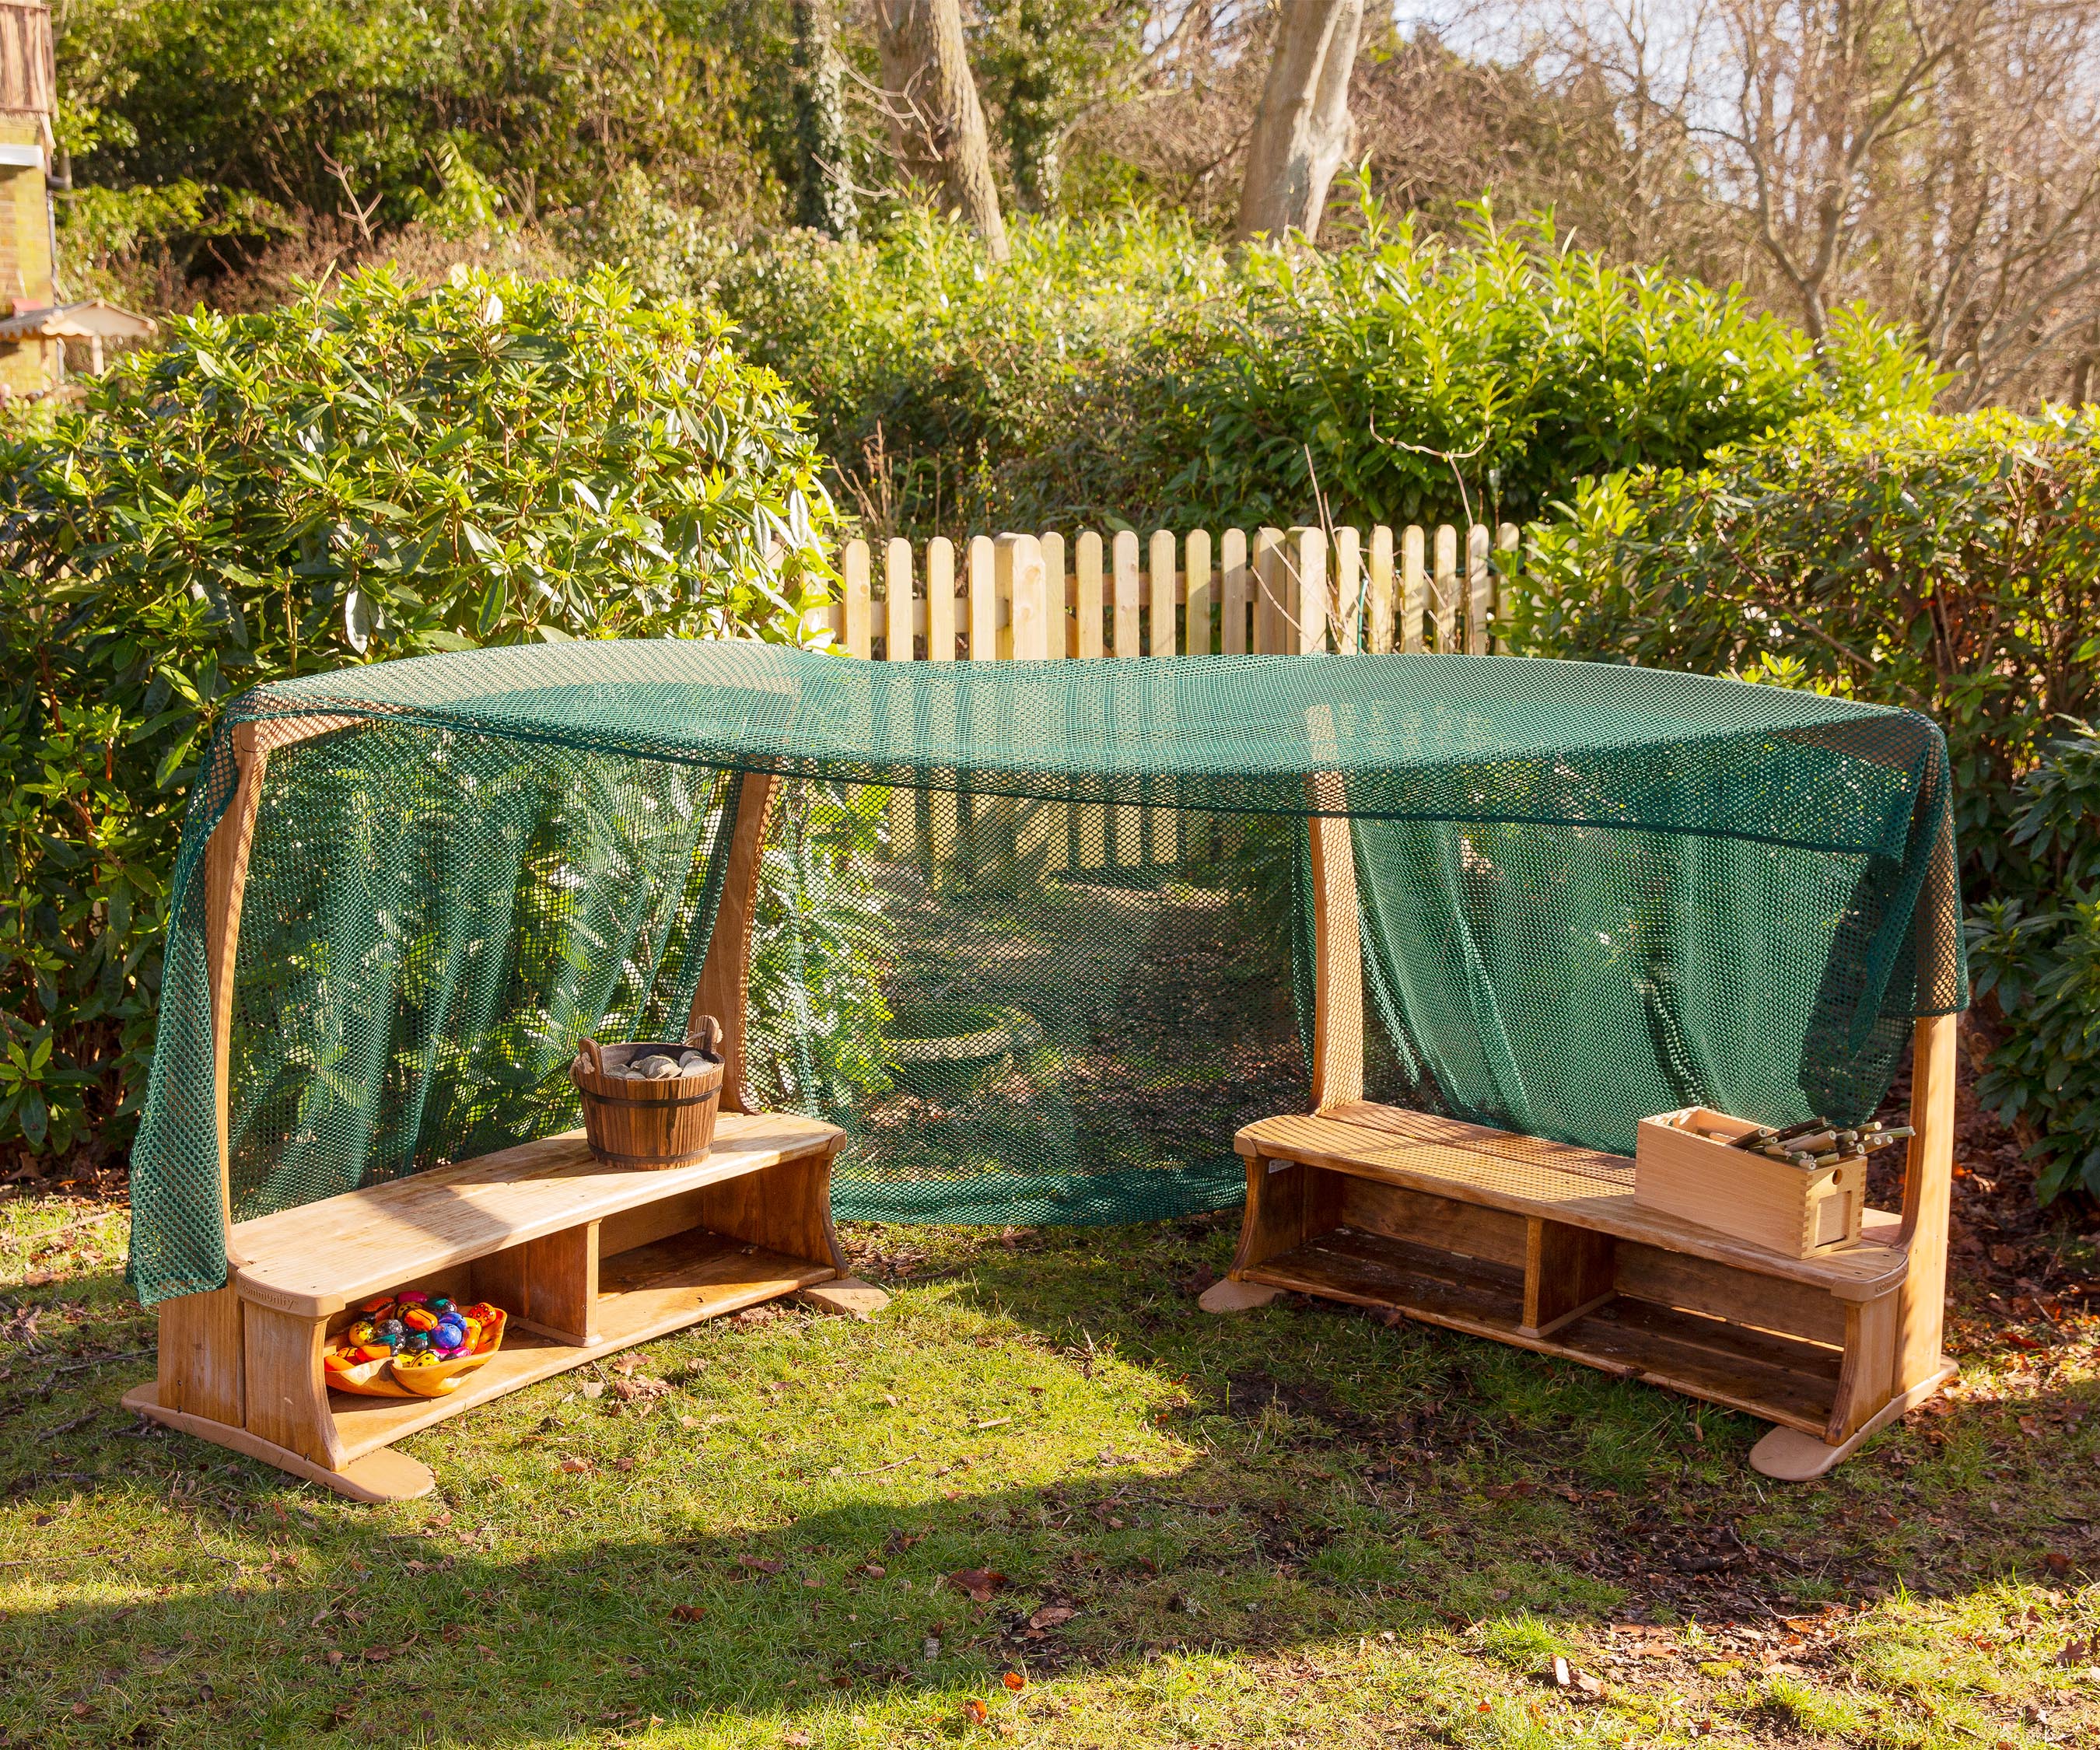 An Outlast arbour set up in a nursery&amp;apos;s outdoor area